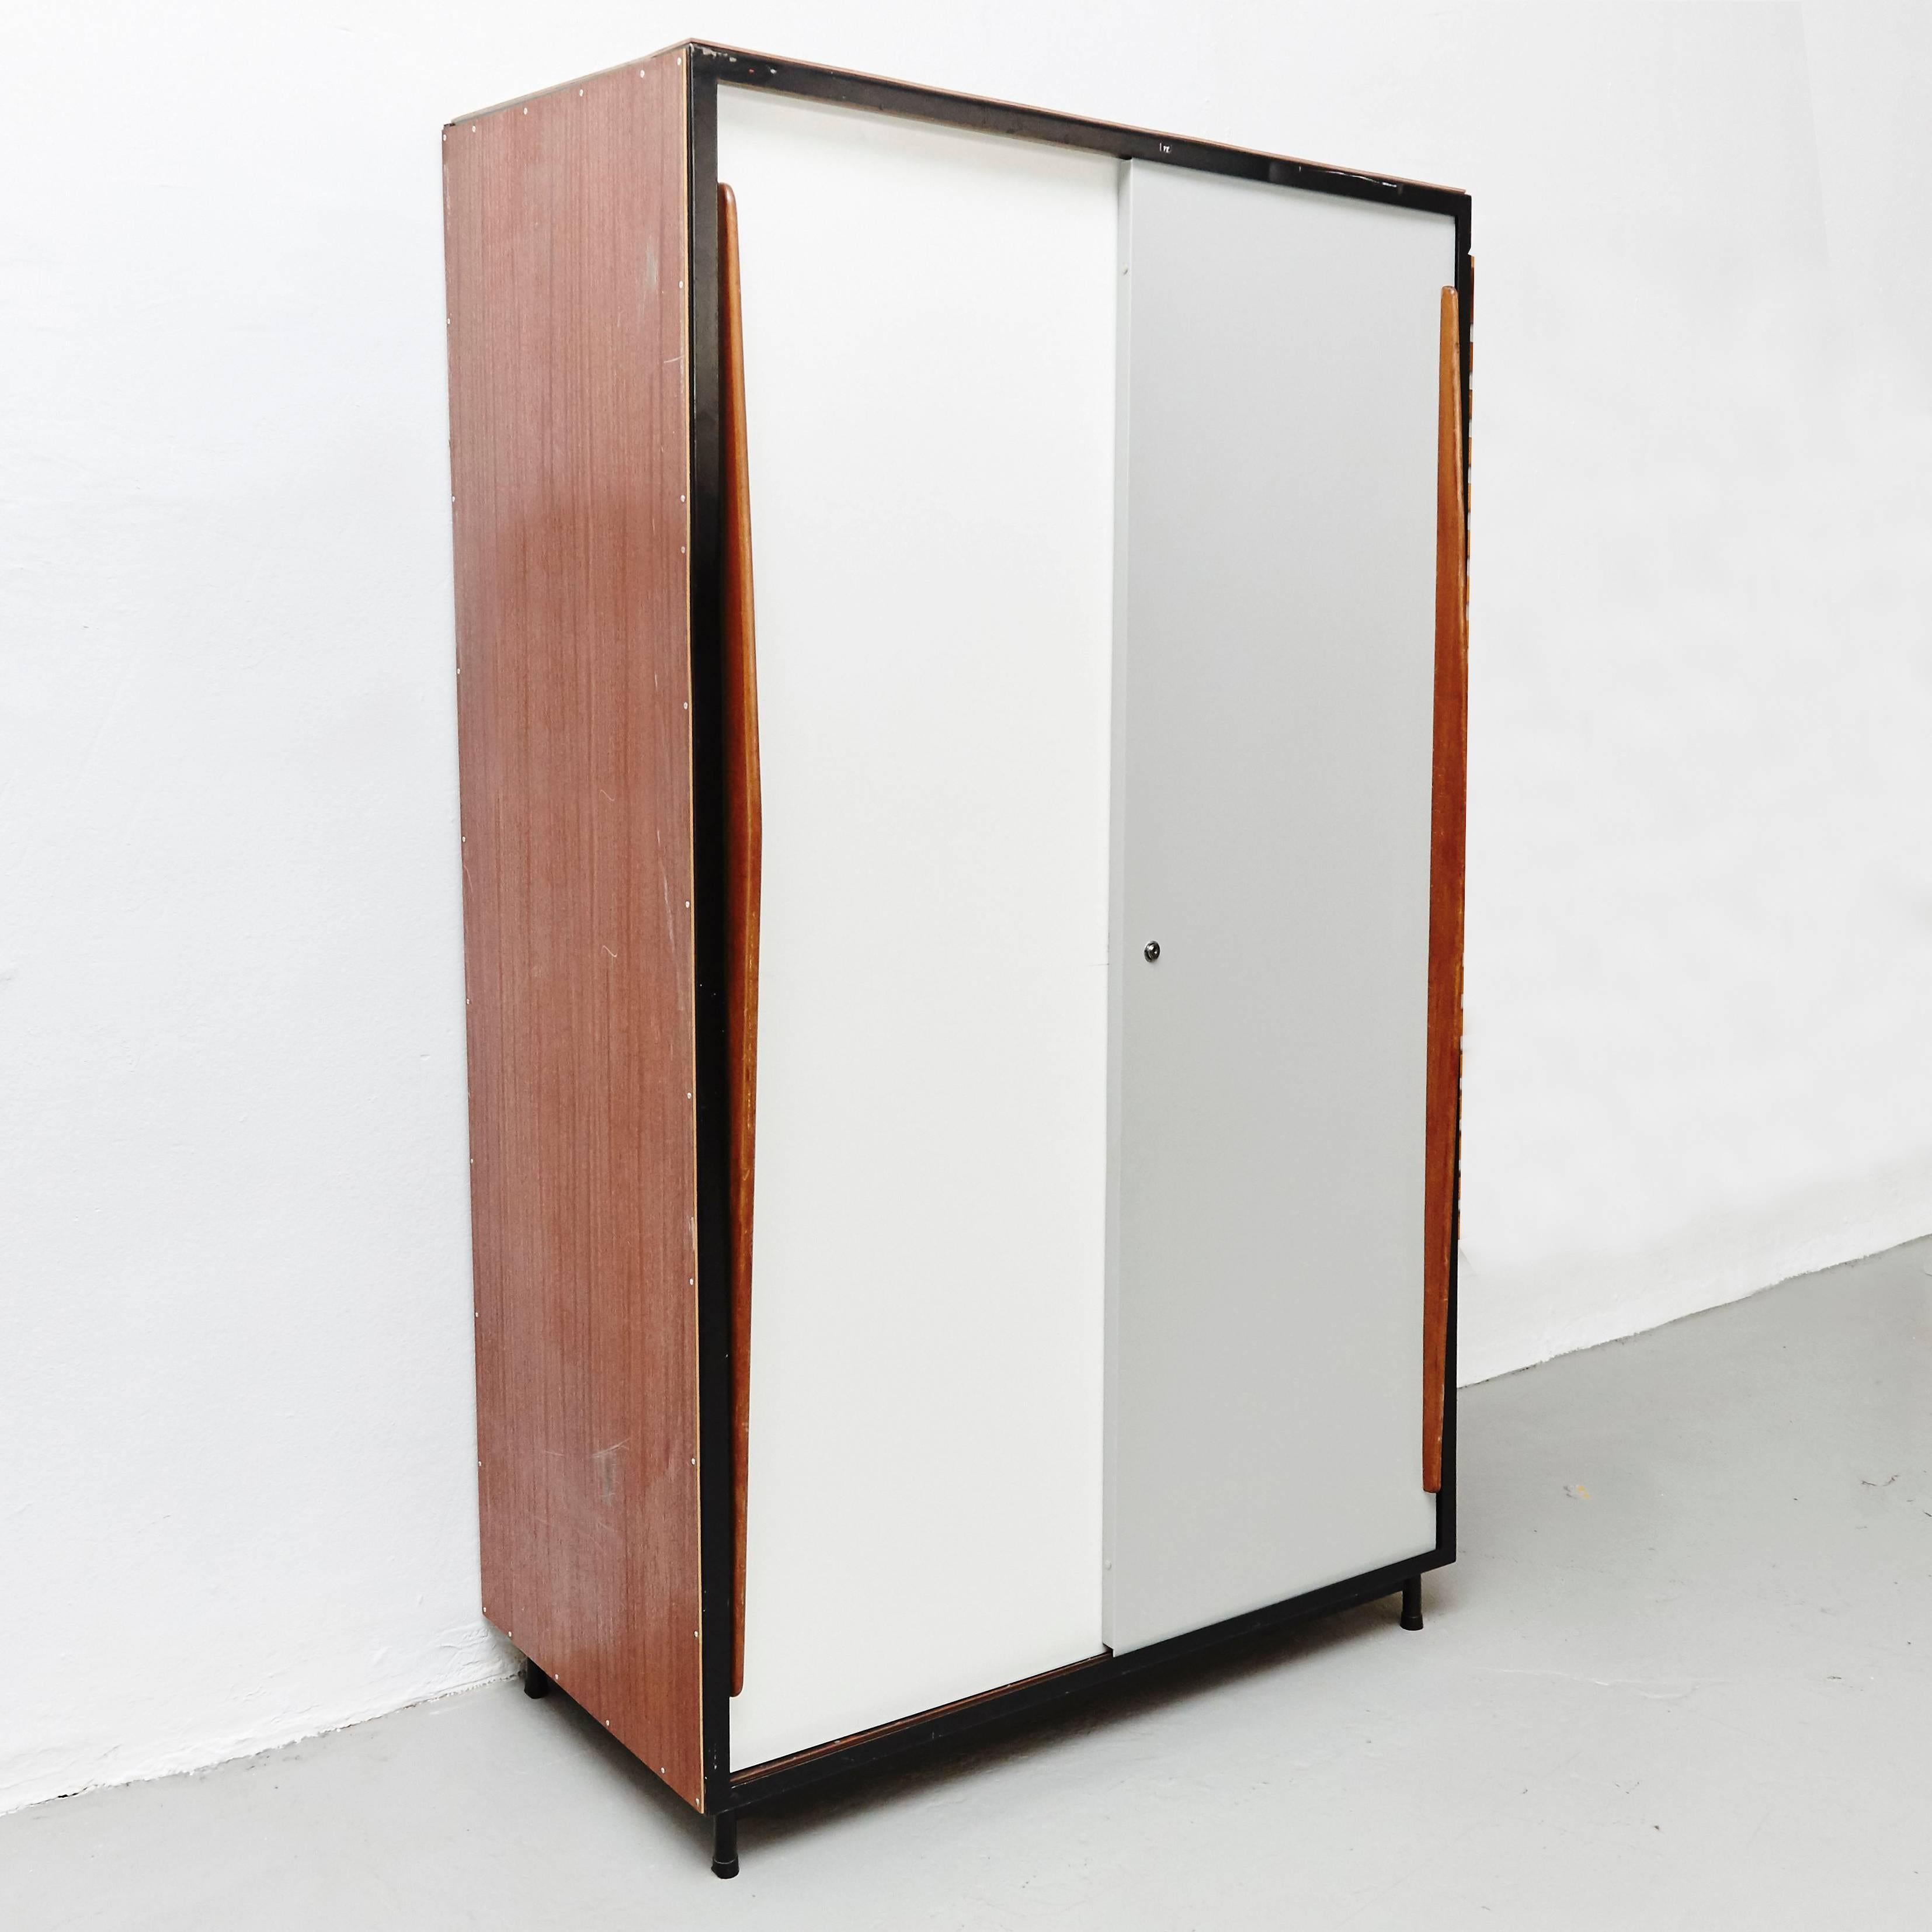 Cabinet designed by Willy Van Der Meeren and executed around 1950 for Tubex.

In good original condition, preserving a beautiful patina, with minor wear consistent with age and use.

Willy Van Der Meeren Born in Belgium in 1942. He began